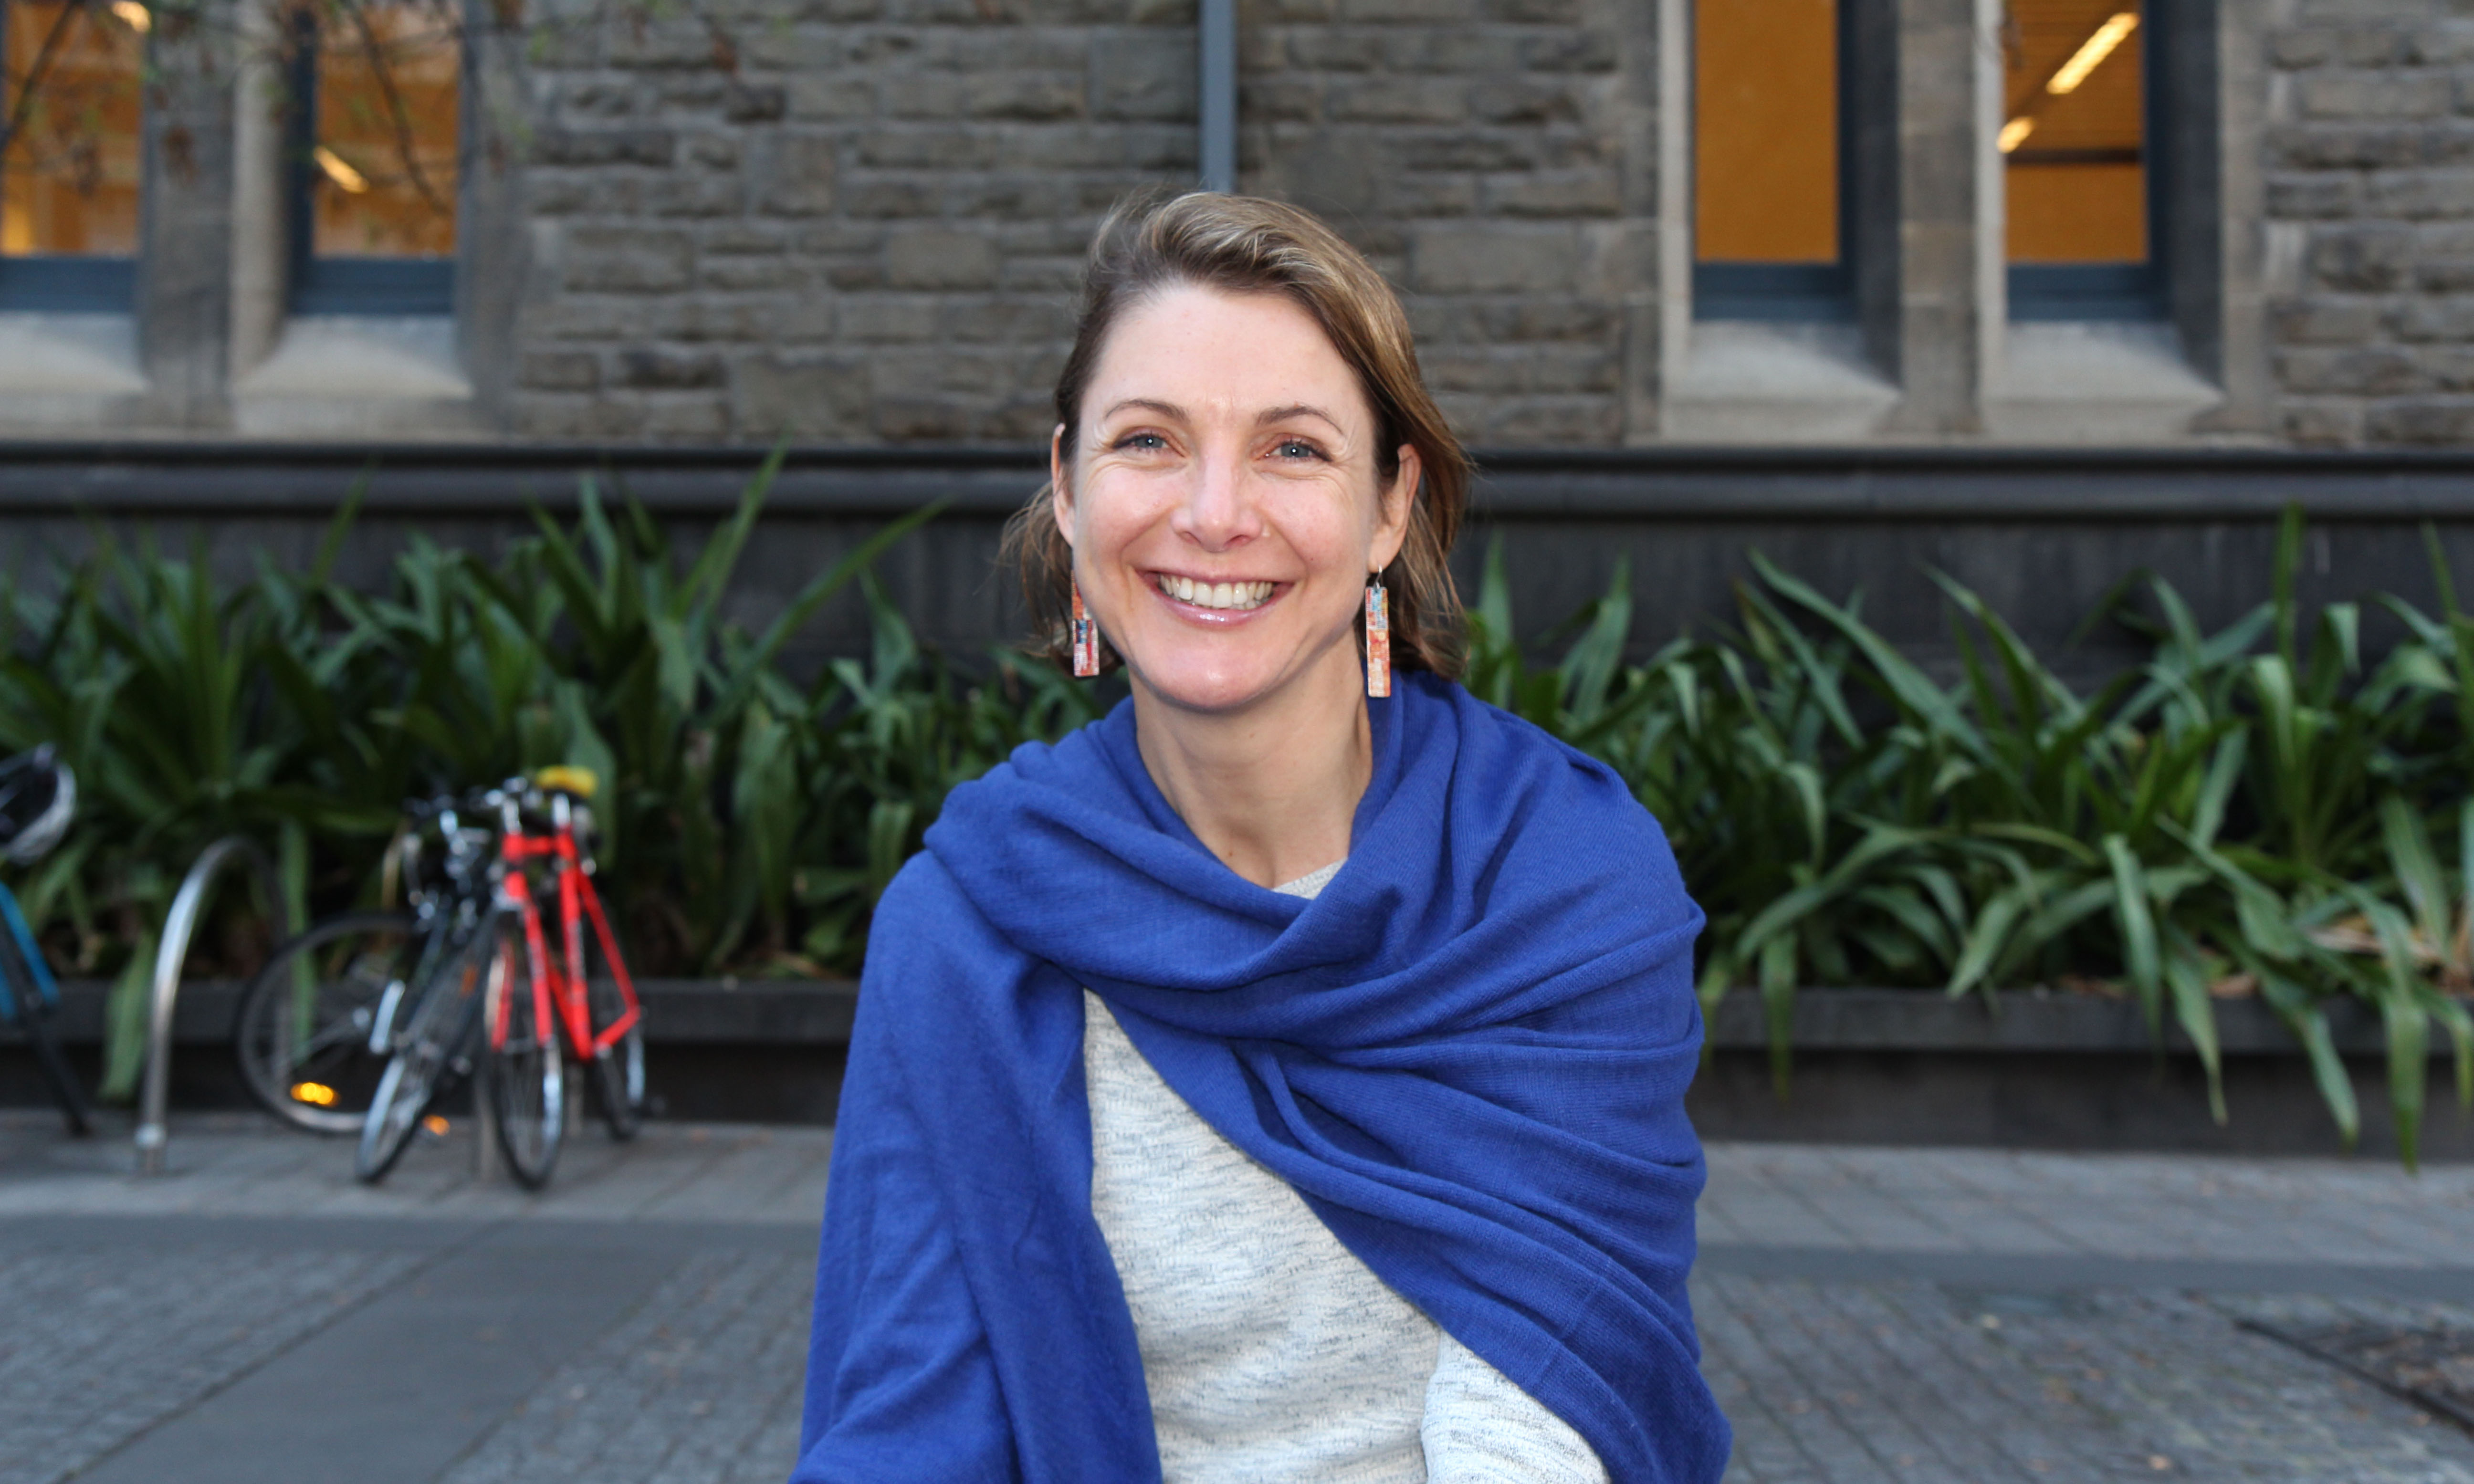 Lauren Rickards is based in the Centre for Urban Research in Melbourne and is focussed on social elements of environmental issues, including climate change.